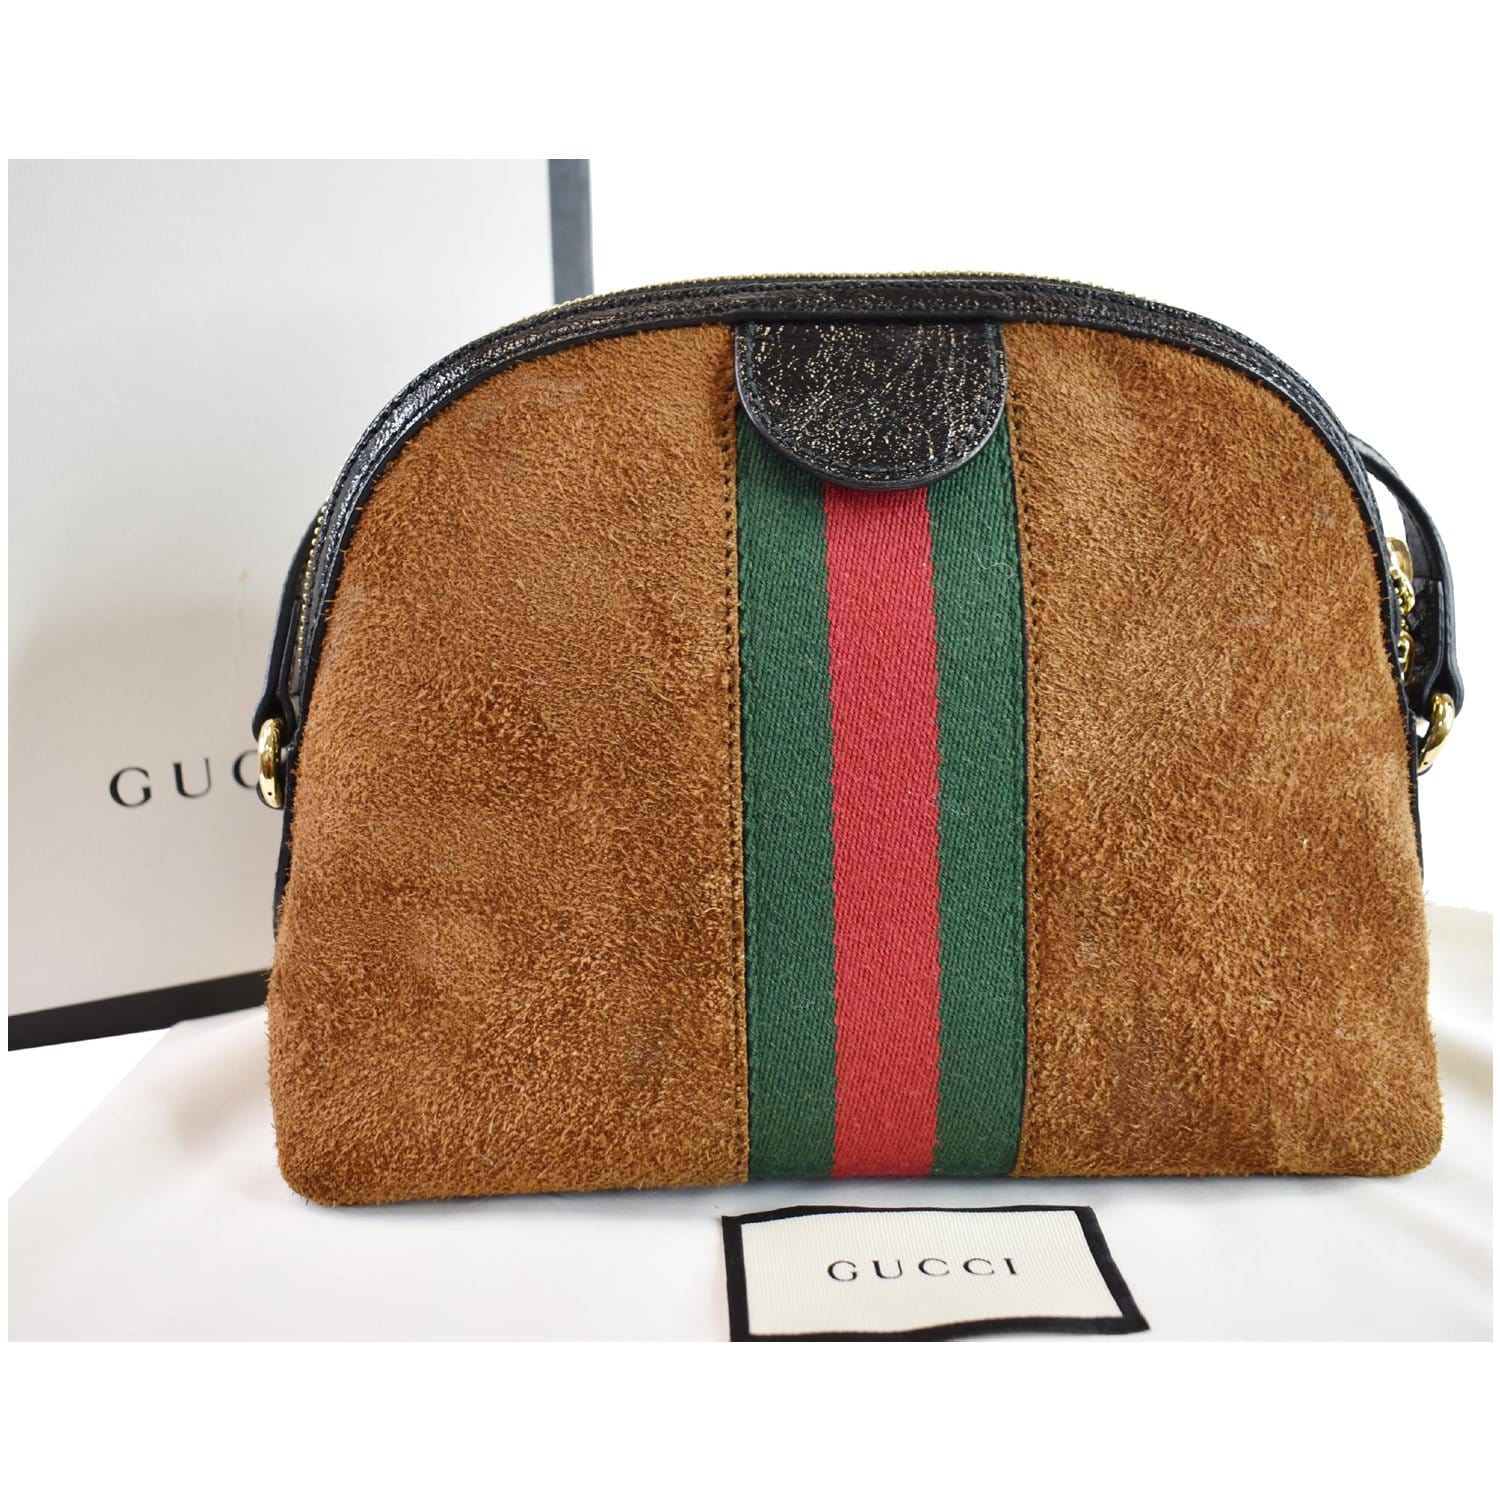 Gucci Mini Ophidia GG Shoulder Bag - Brown - One Size